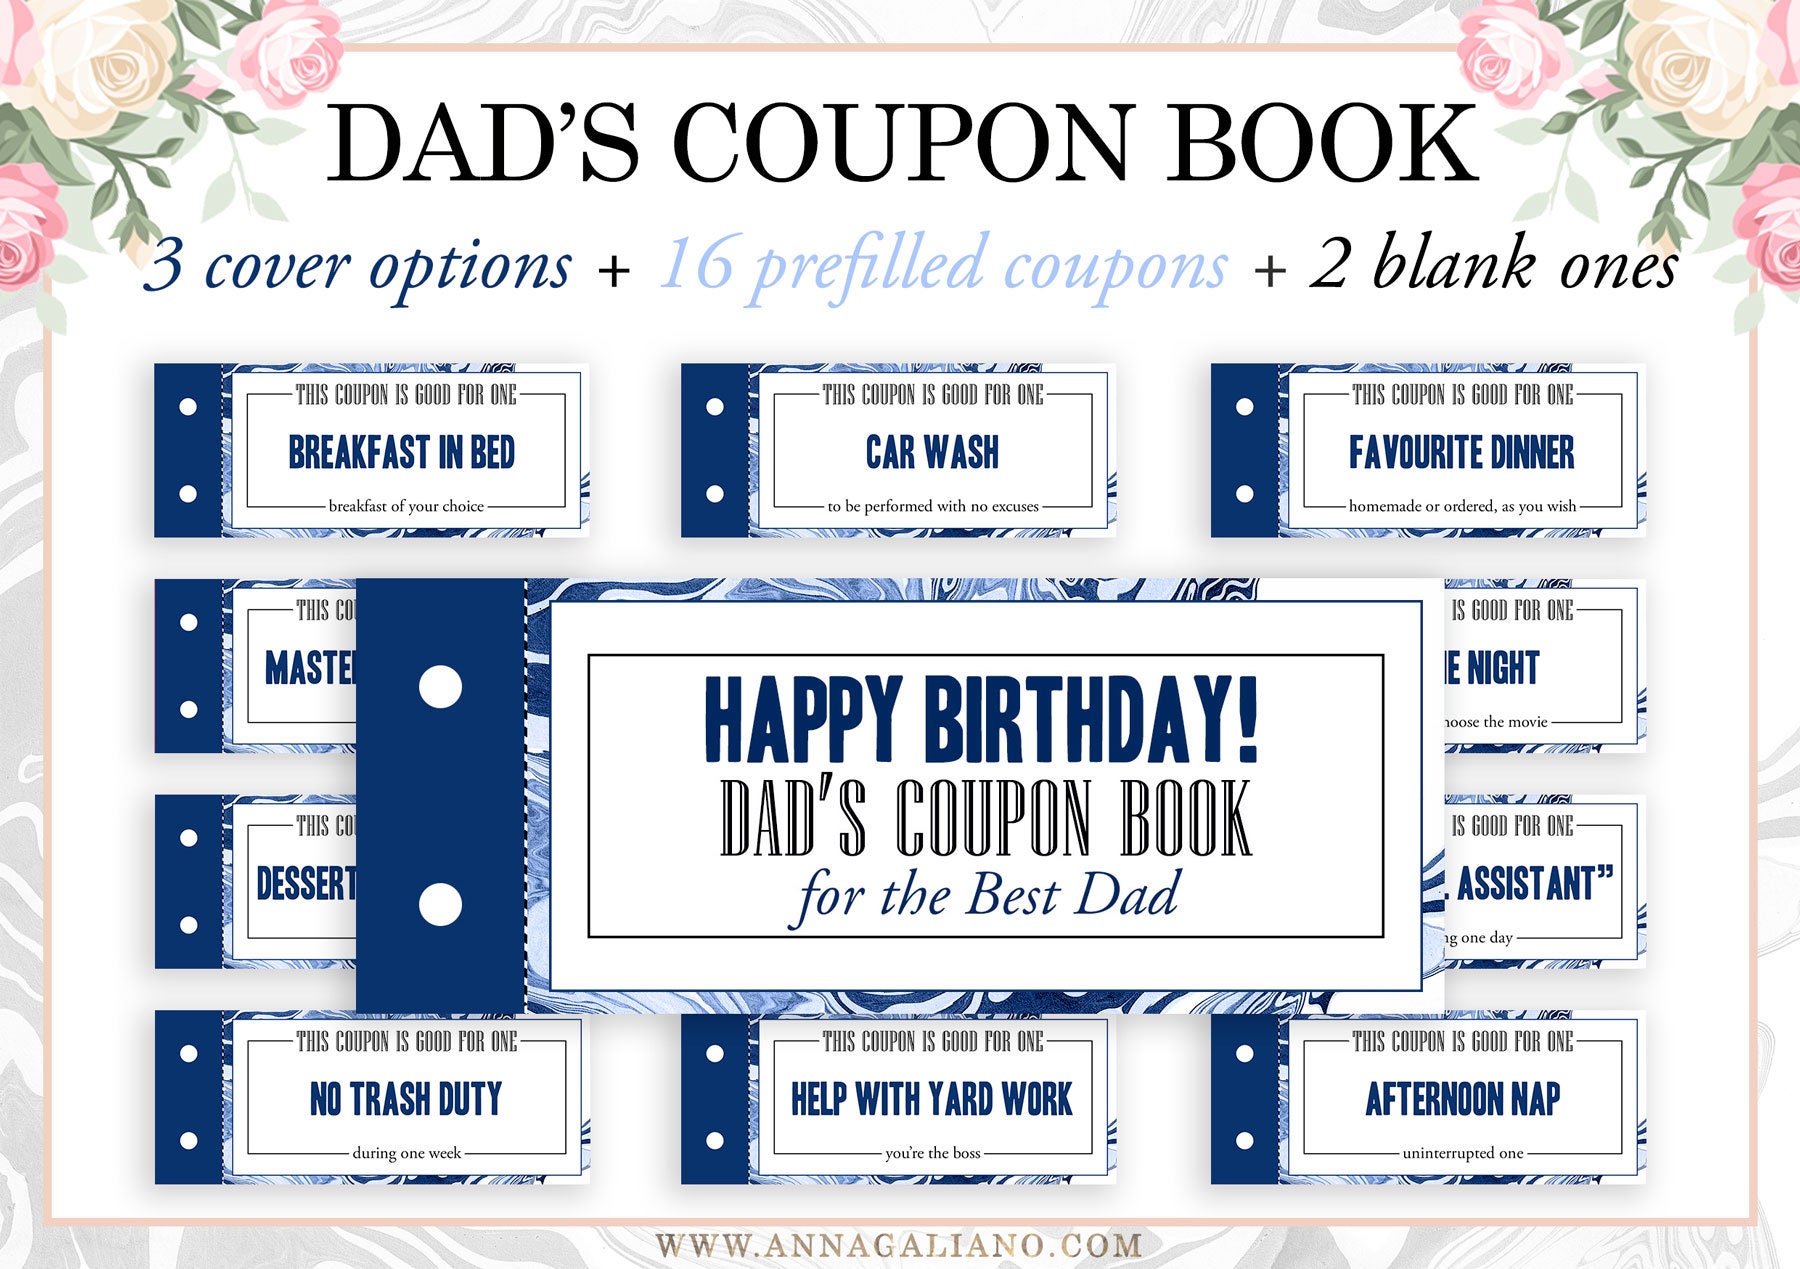 dad-s-coupon-book-printable-coupons-dad-s-gift-etsy